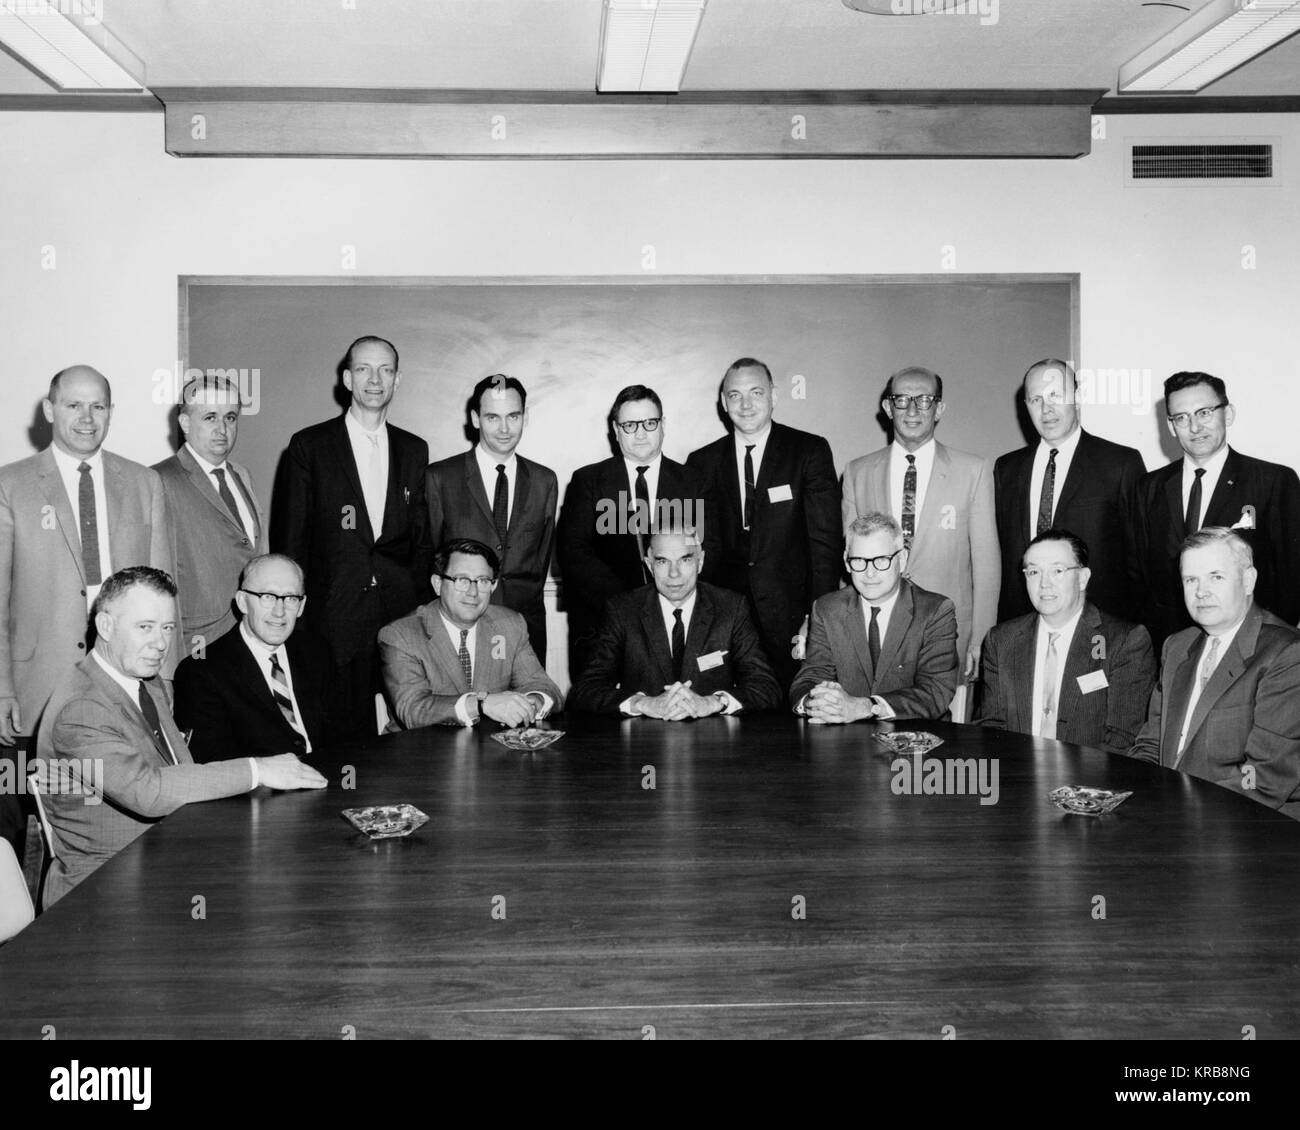 Atomic Energy Commission (AEC) officials with Abe Silverstein (front row, sitting third from left), working out the final reactor licensing issues. It is said that Silverstein told AEC Director Glenn Seaborg that the officials could not leave until a deal was struck. Because Plum Brook was a federal acility, it was not required to file for an AEC license, but to promote peace of mind in the nearby community and maintain safety, NASA officials decided to work through the commission. They received the AEC designation Test Reactor 3 (TR-3). Atomic Energy Commission, Abe Silverstein (9465040385) Stock Photo